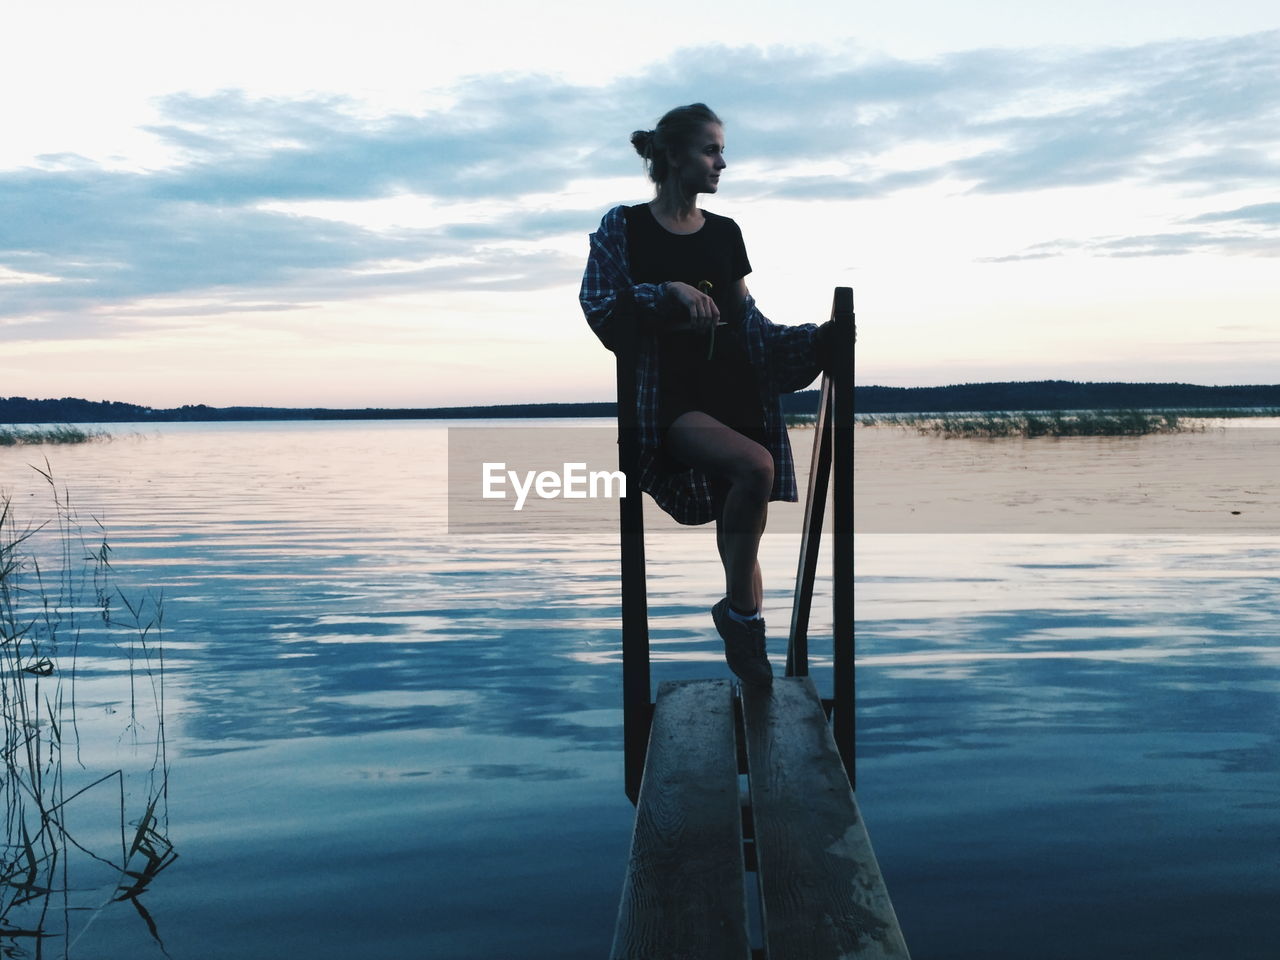 Young woman standing on wooden plank in lake against sky during sunset